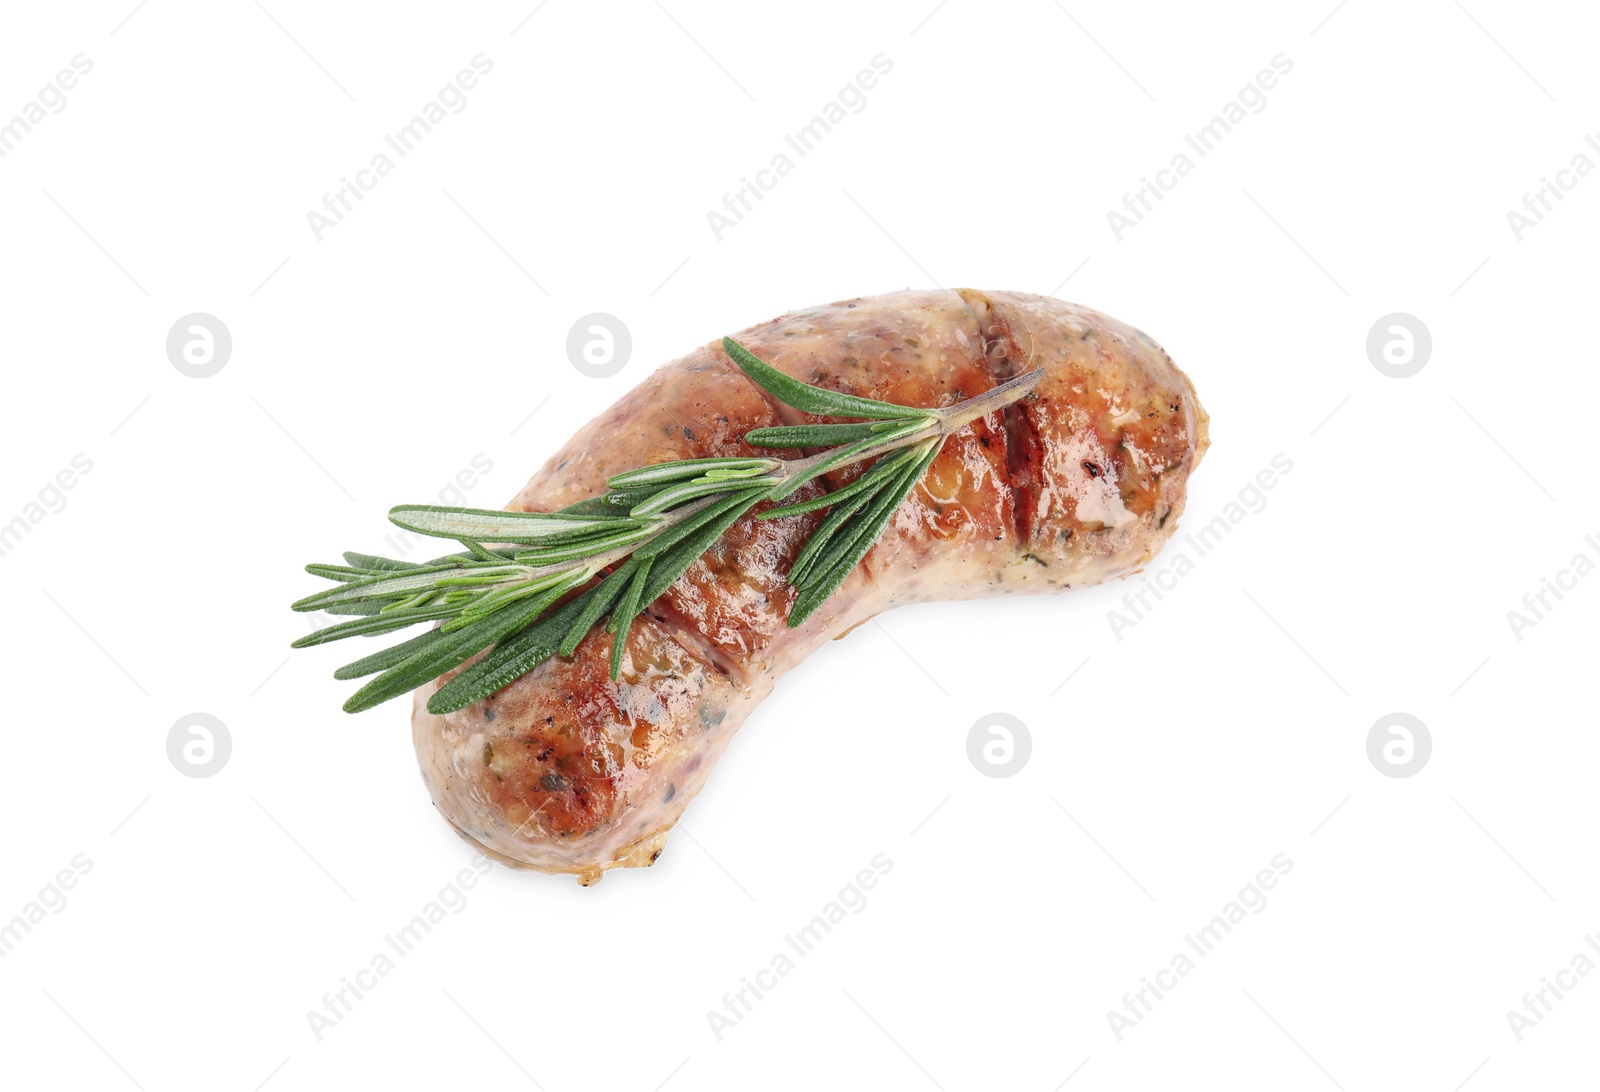 Photo of Grilled sausage and rosemary isolated on white, top view